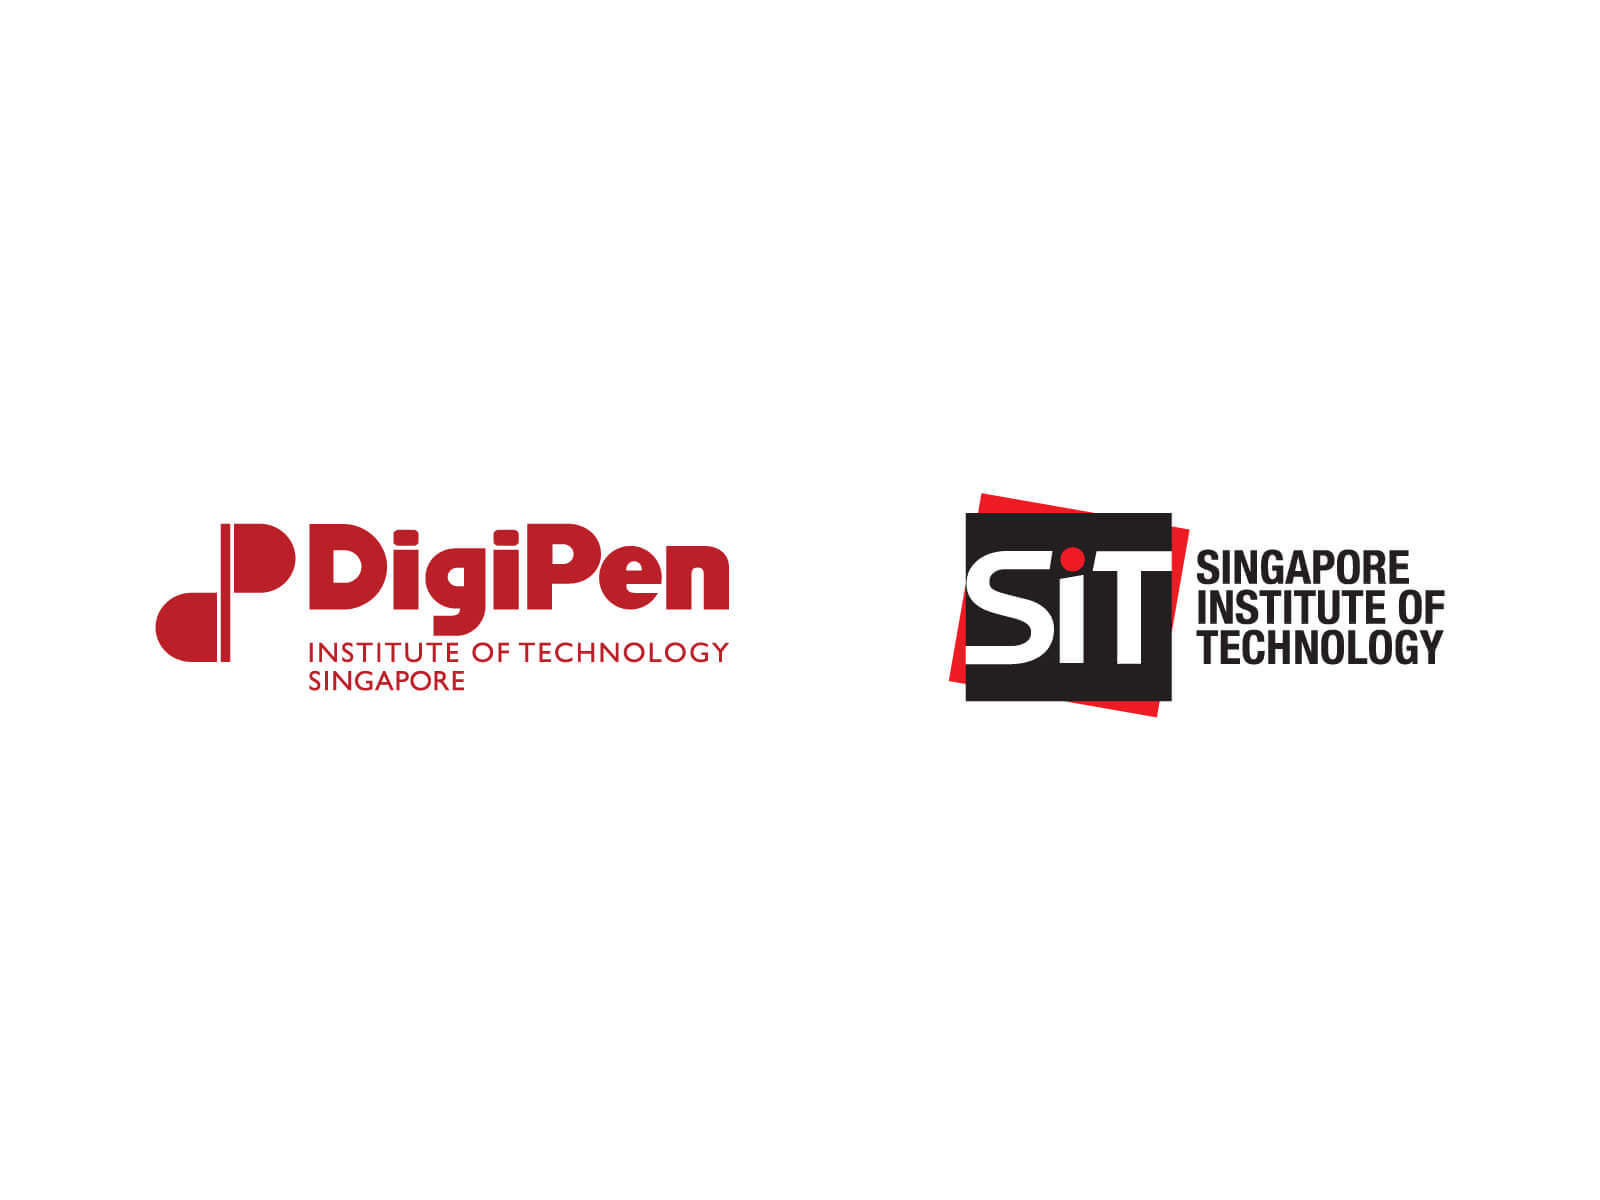 DigiPen Institute of Technology and Singapore Institute of Technology logos